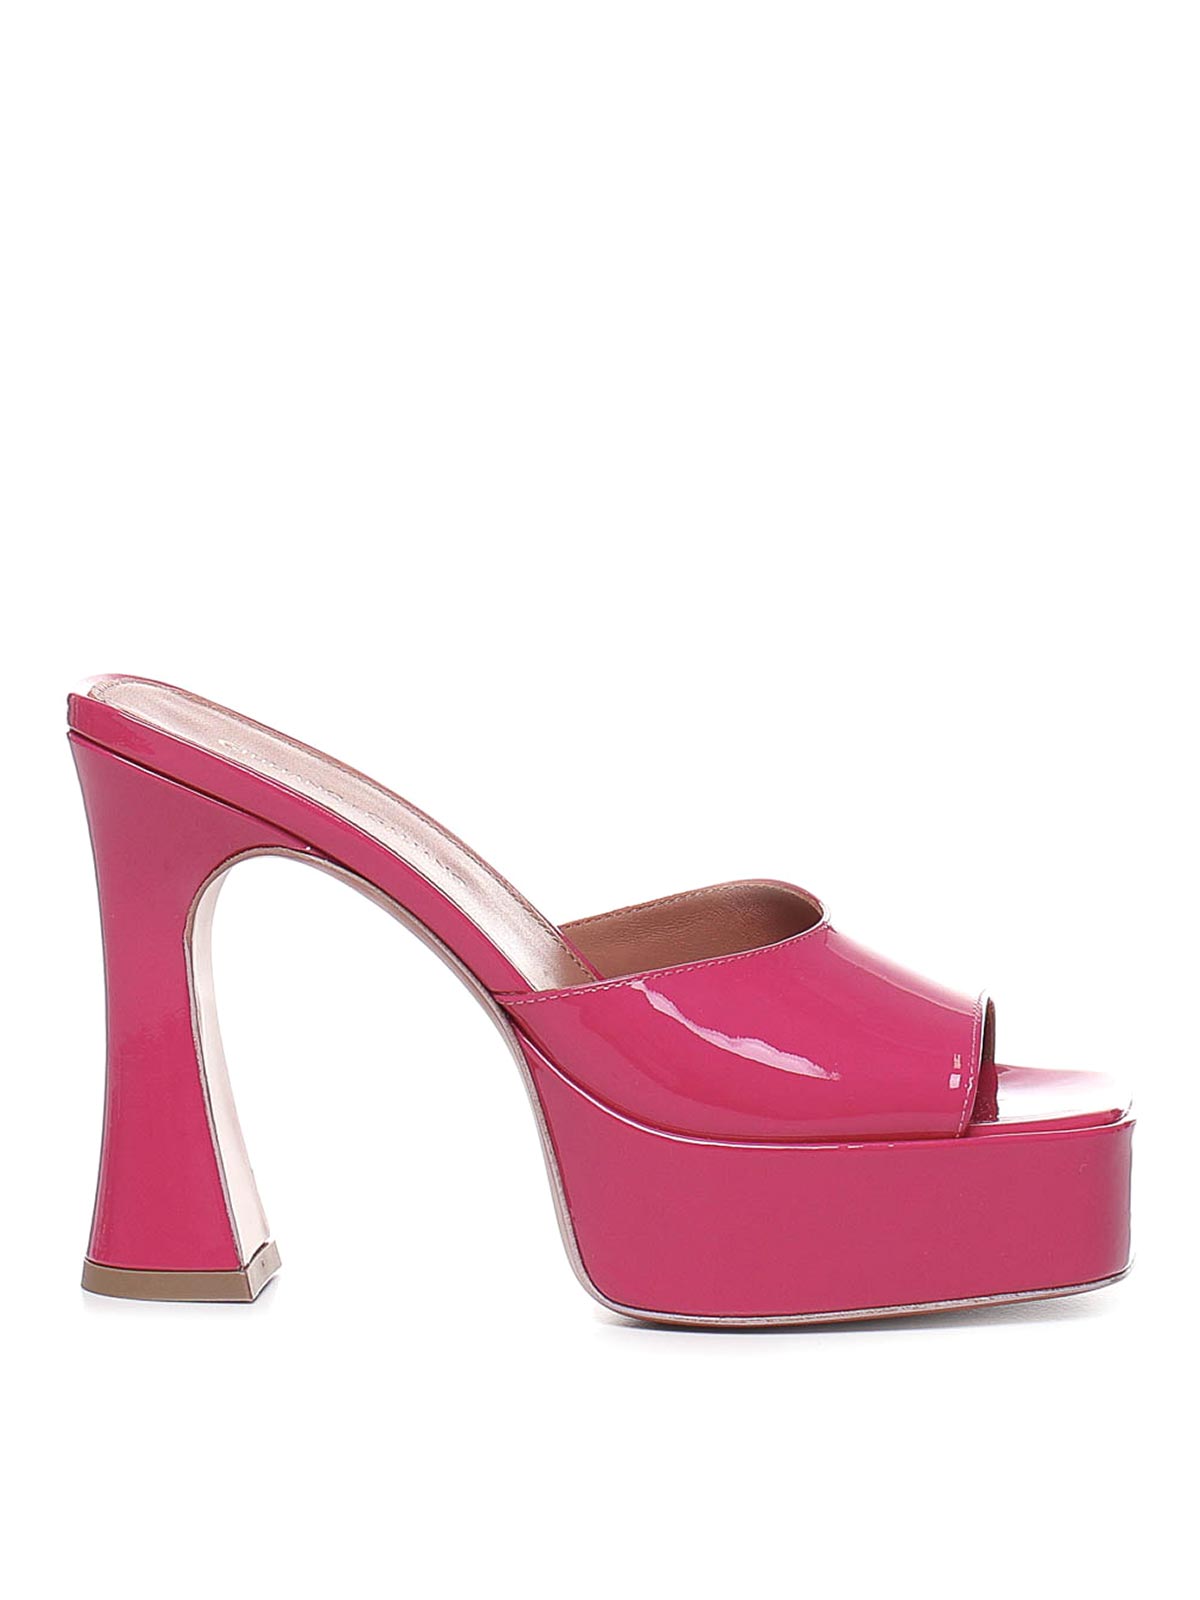 Giuliano Galiano Charlie Mules In Patent Leather In Color Carne Y Neutral